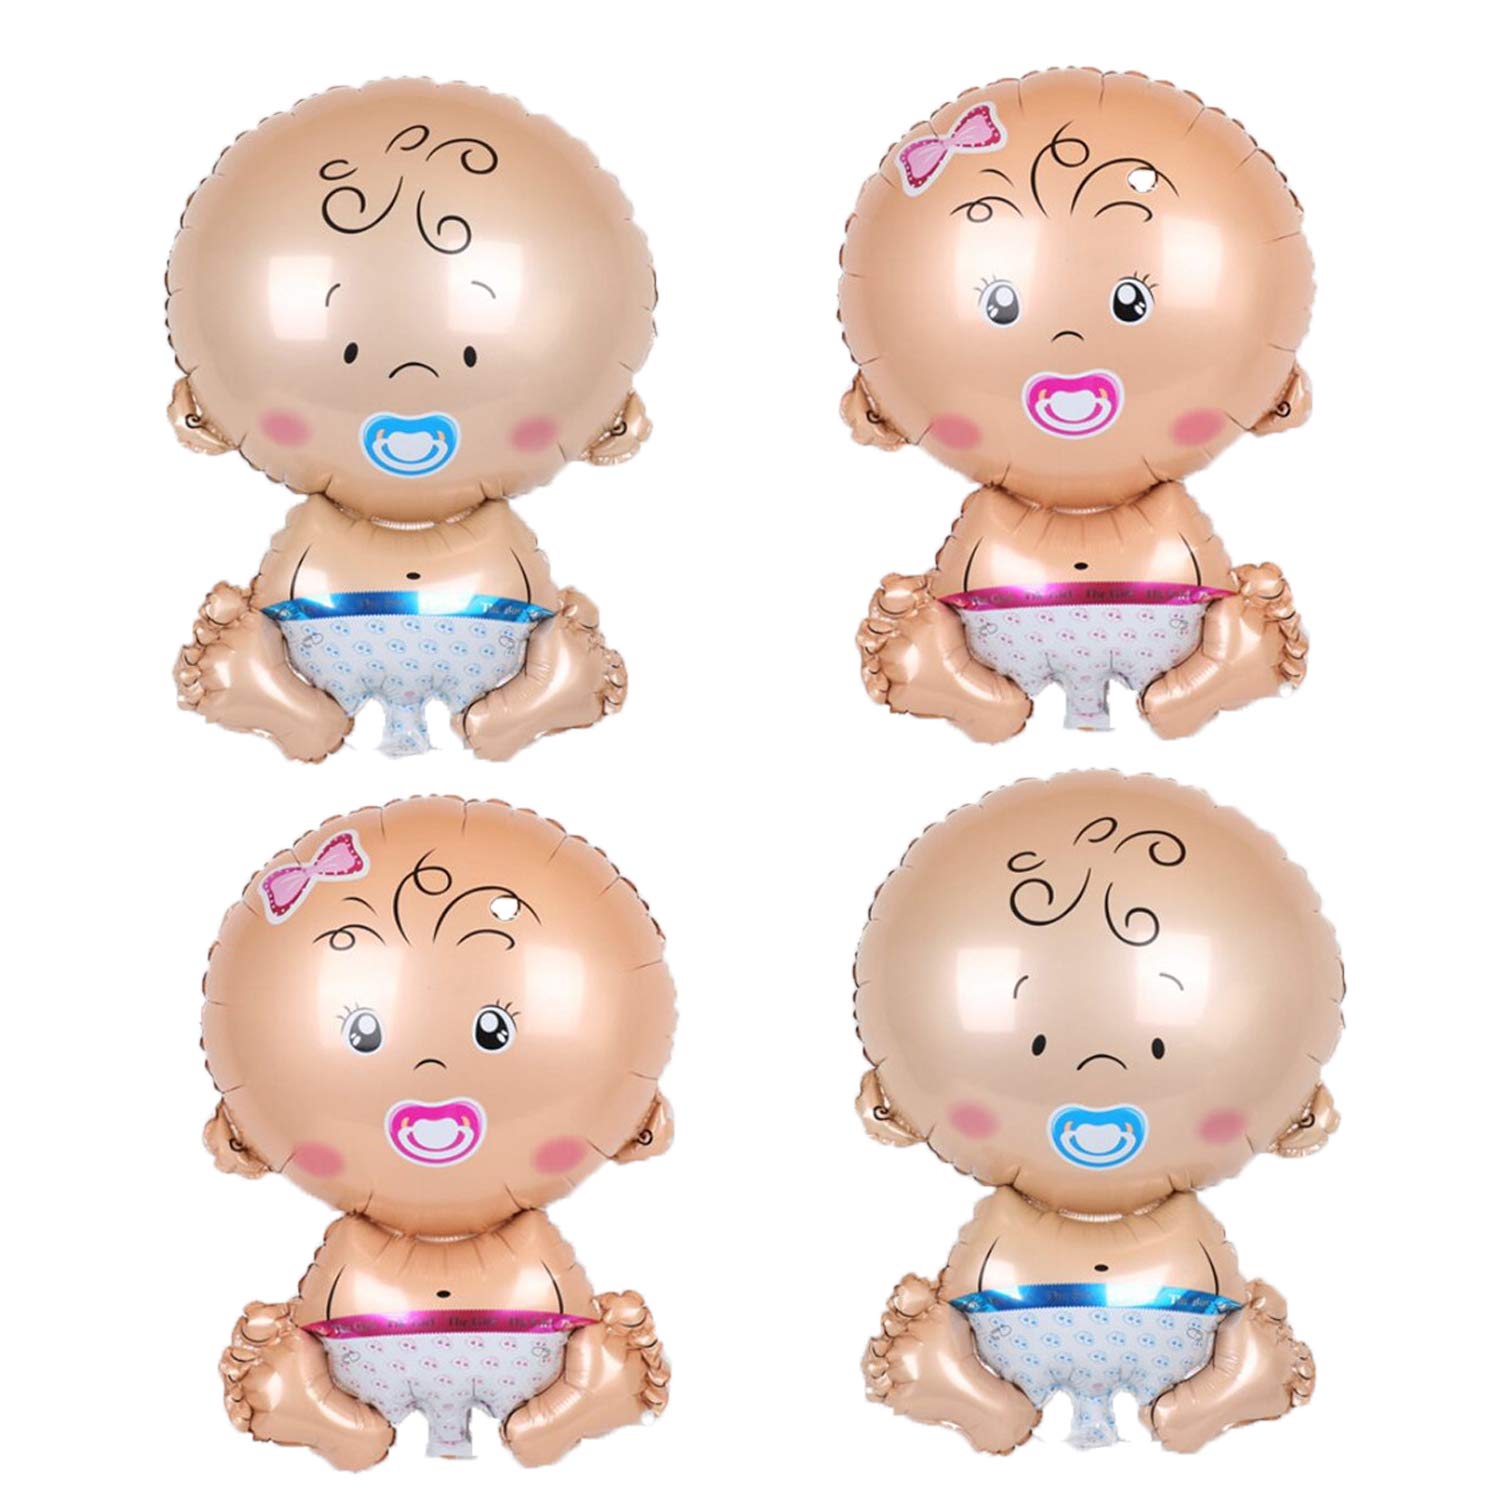 4PCS Gender Reveal Baby Foil Balloon Suitable for Baby Shower Party Supplies Decoration Wedding Kids Birthday Party Balloon Decoration Supplies